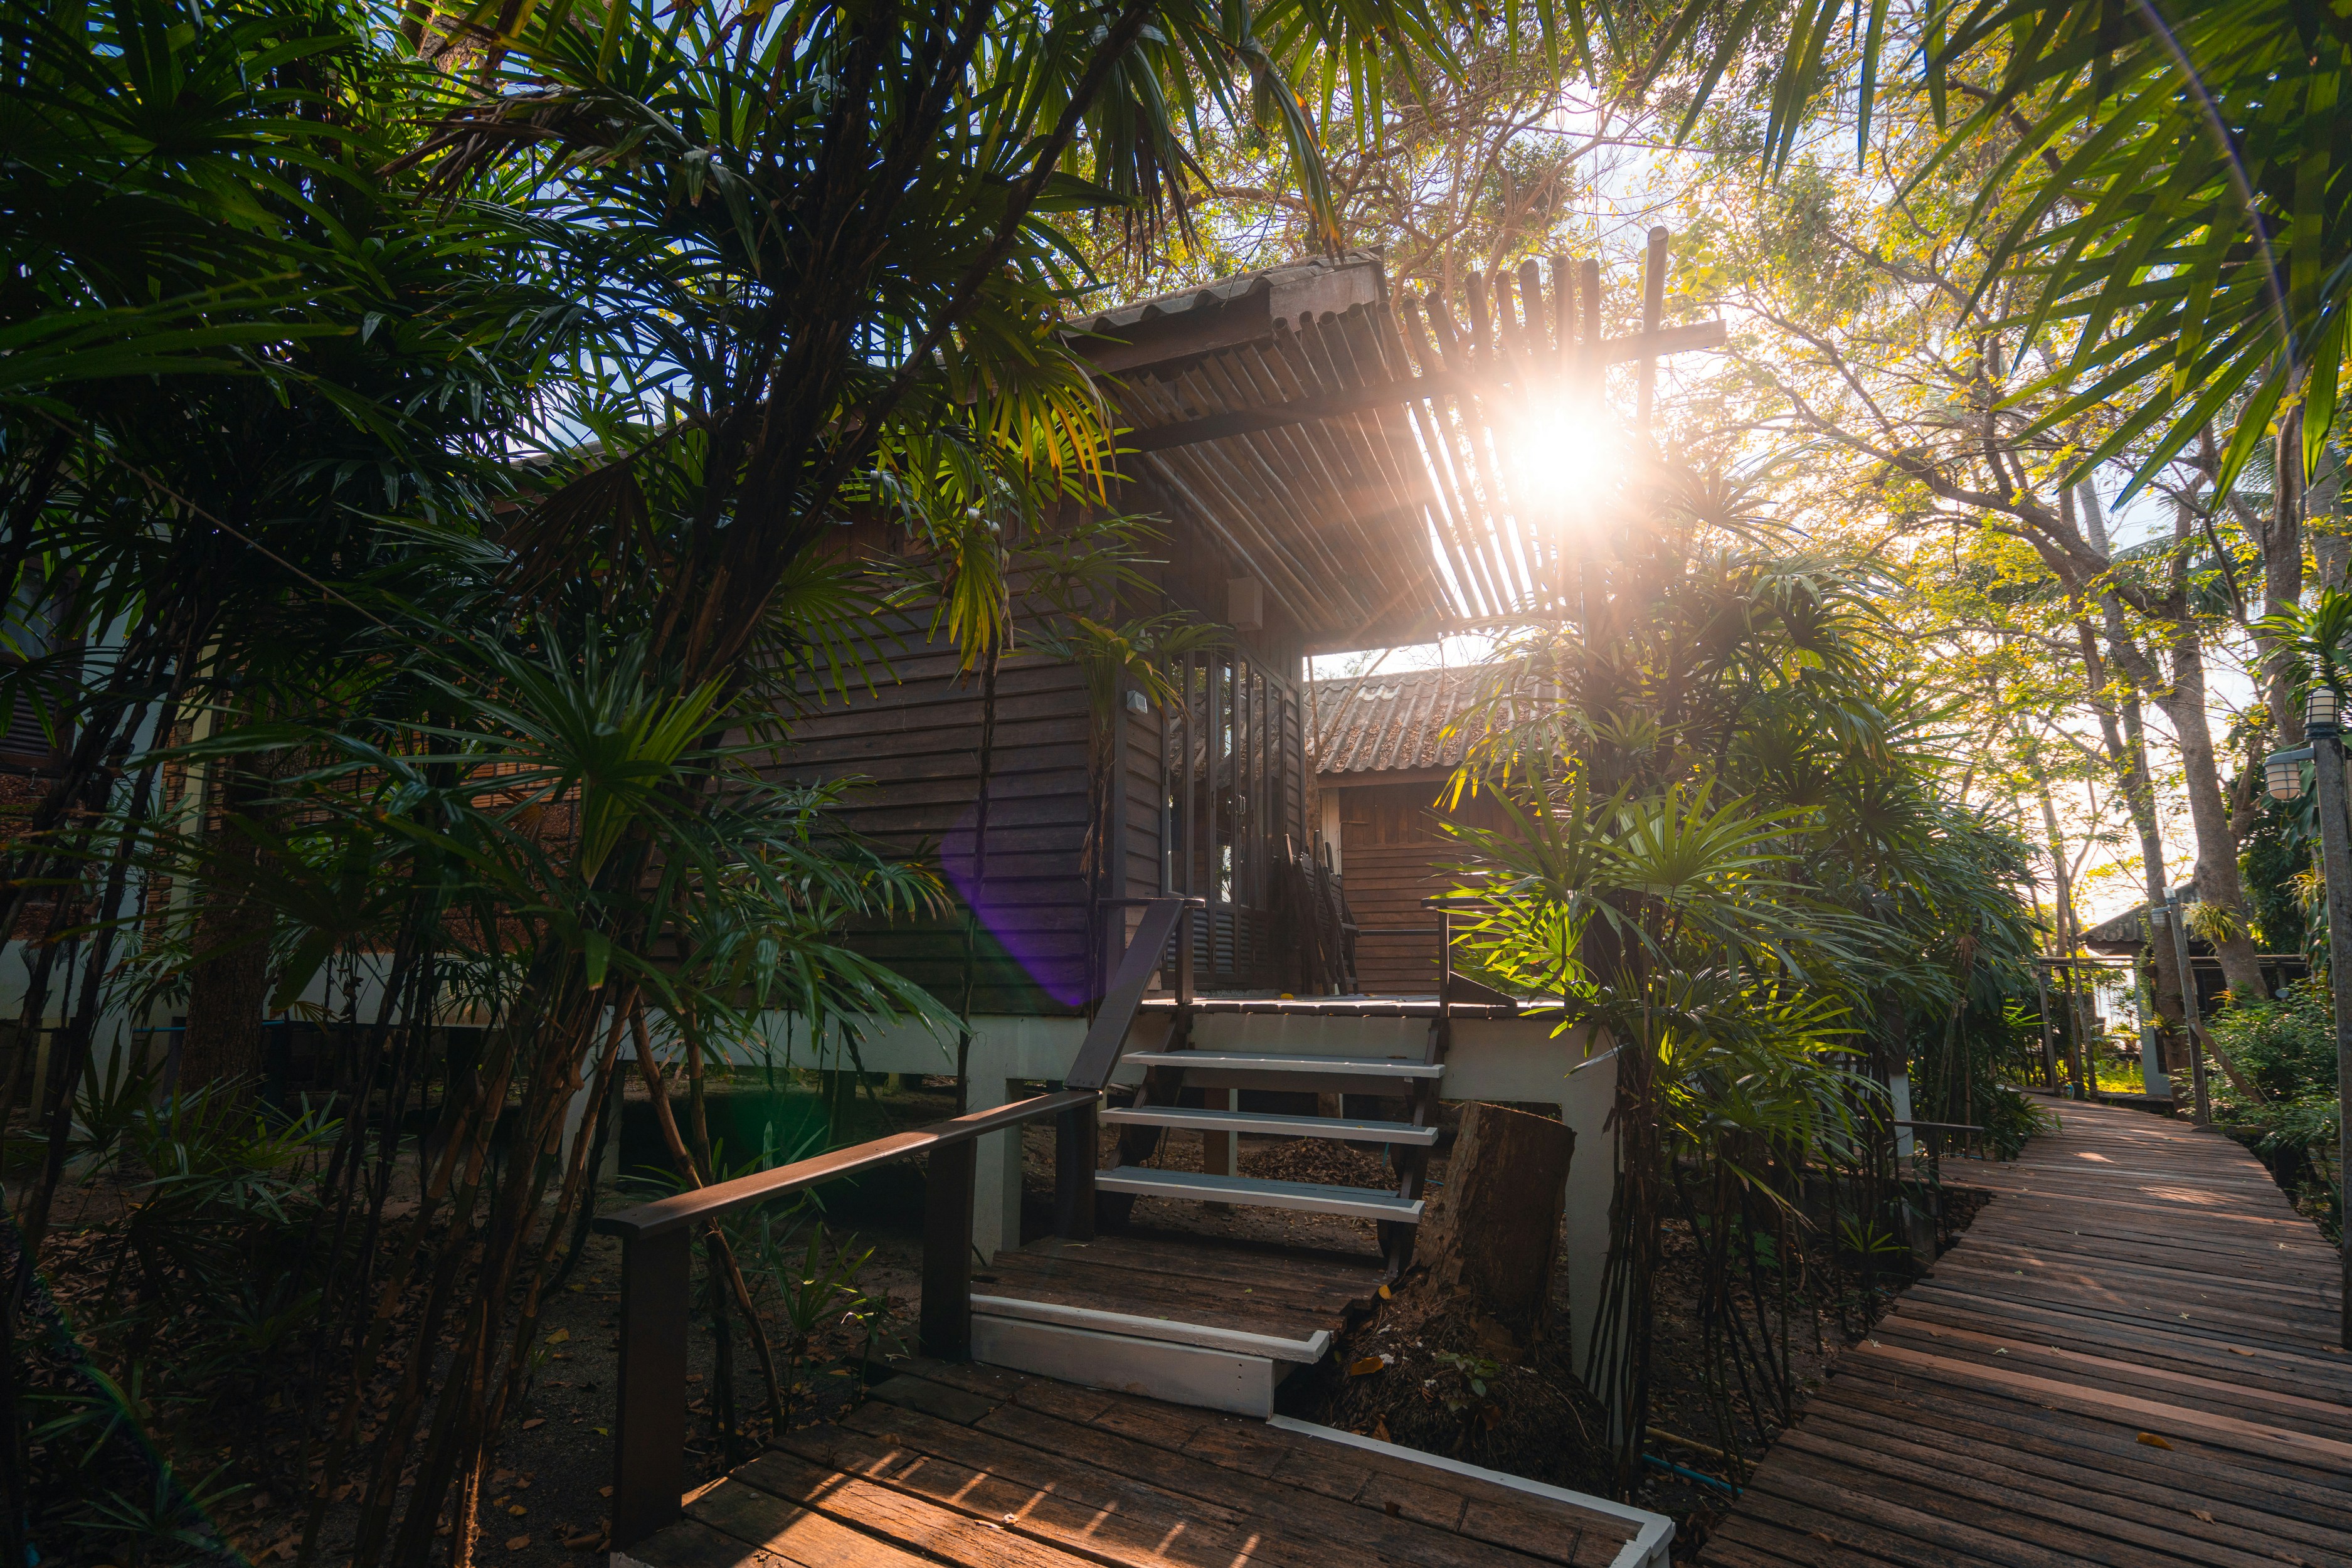 Bungalow in jungle at sunset